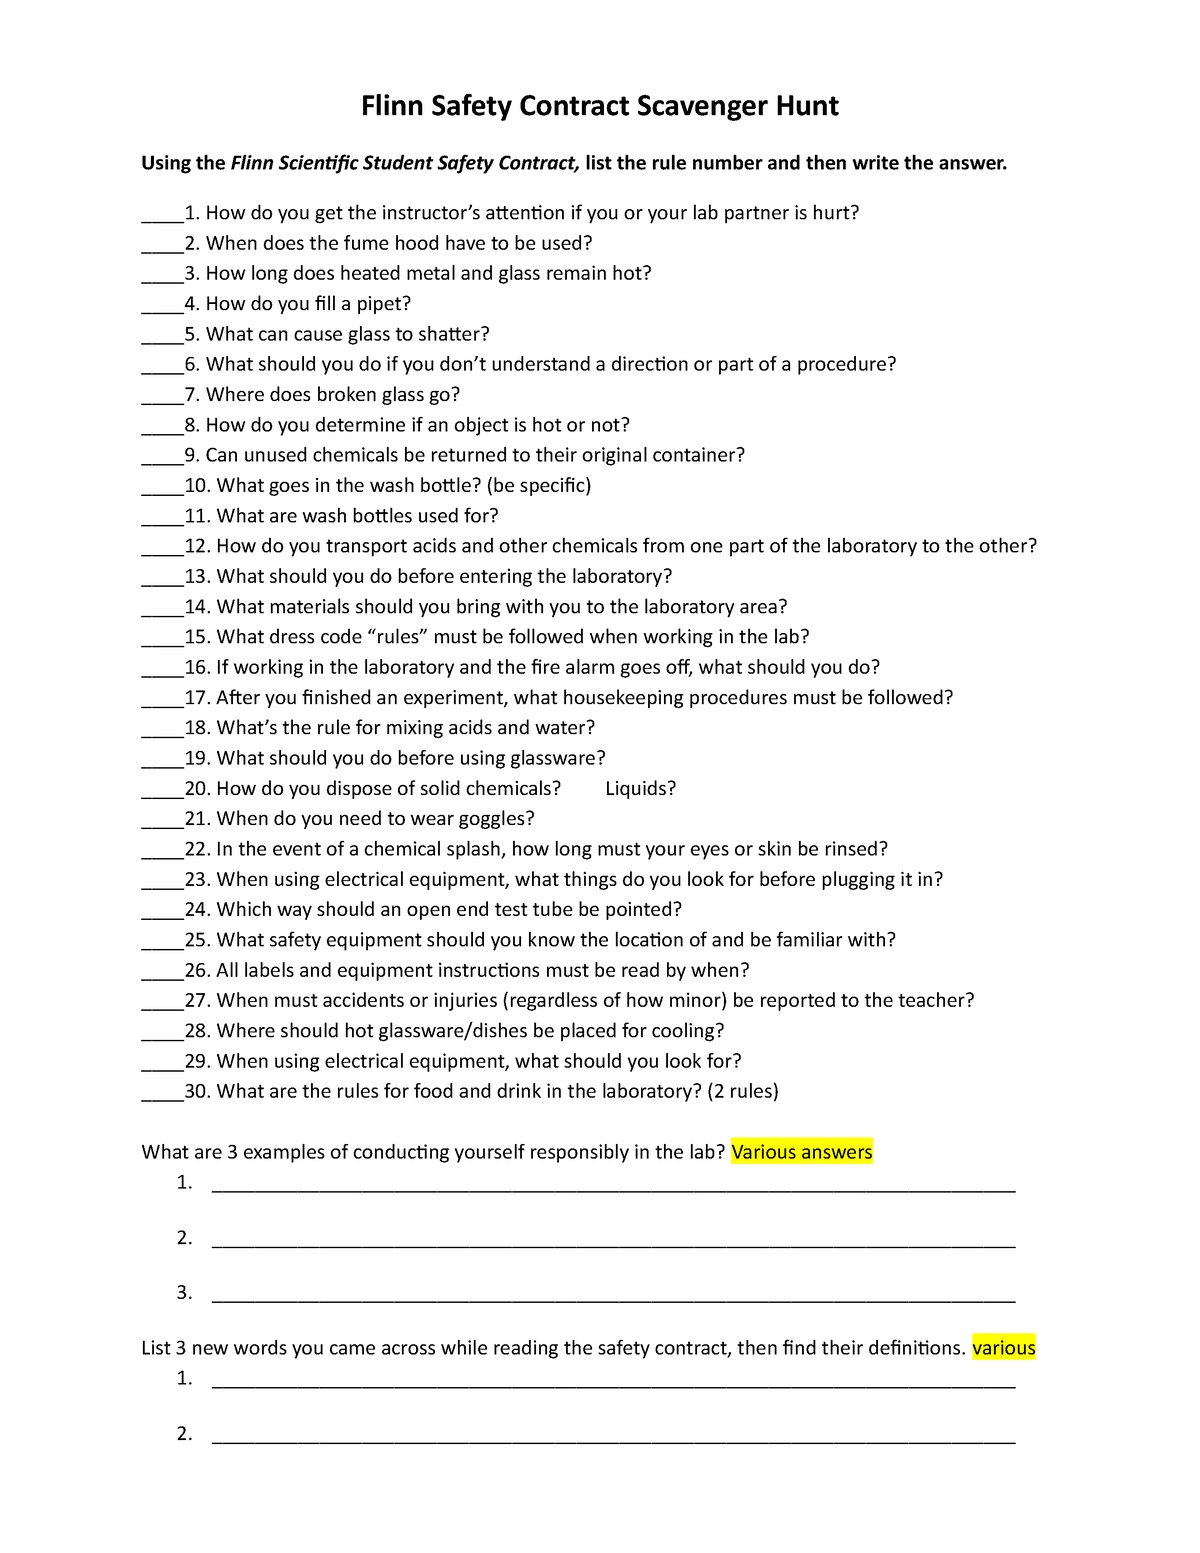 flinn-safety-contract-scavenger-hunt-1-how-do-you-get-the